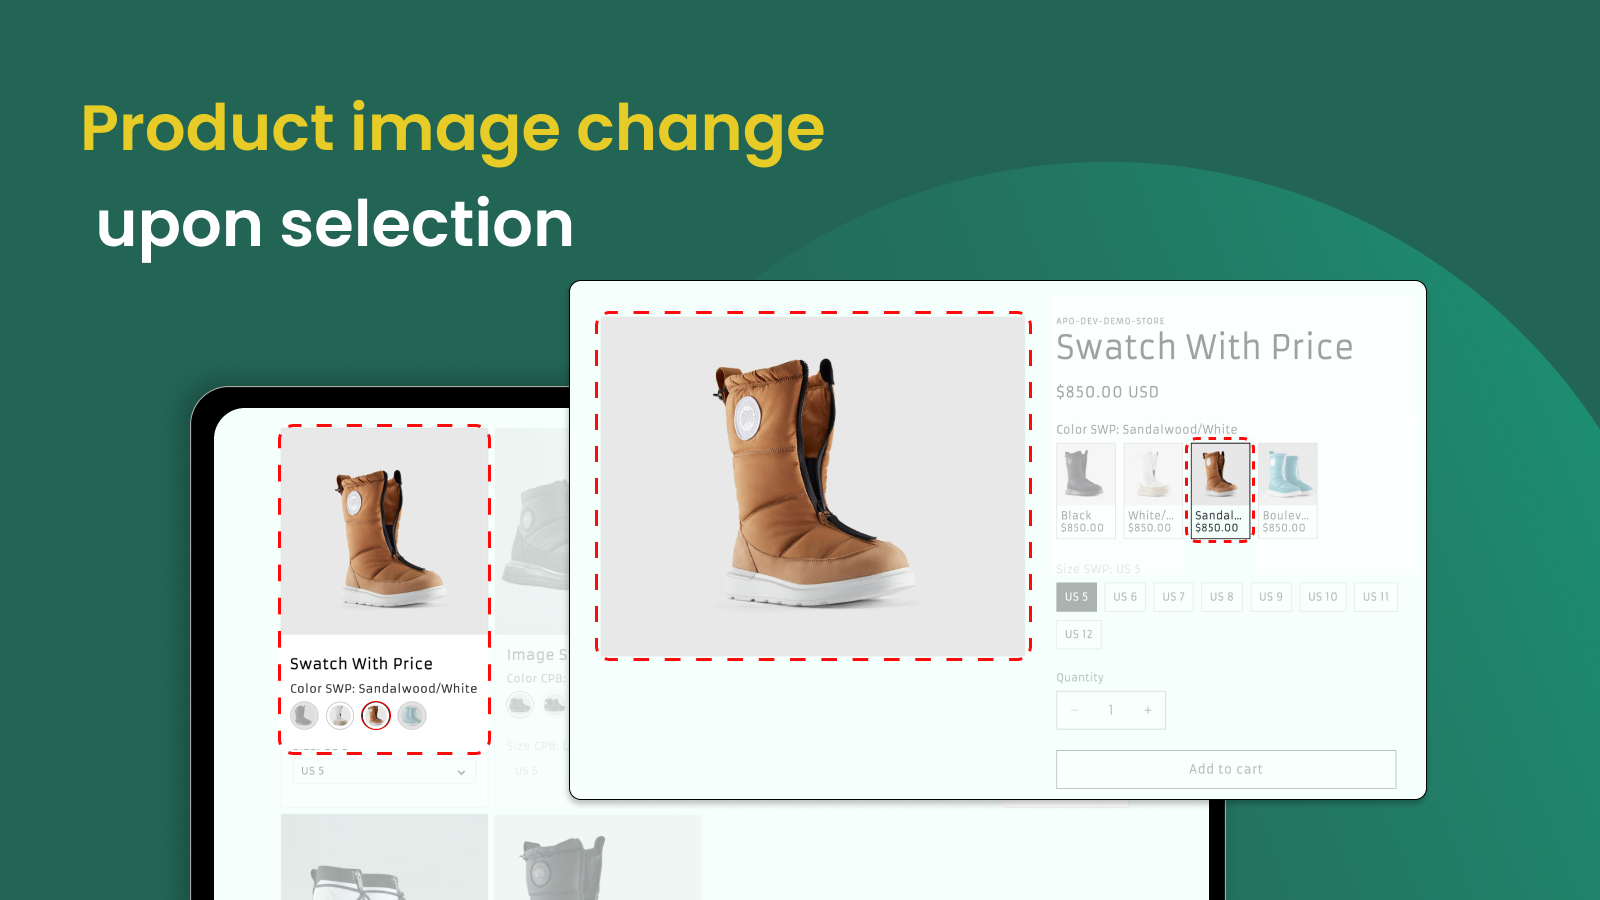 Change product image according to customers' selection